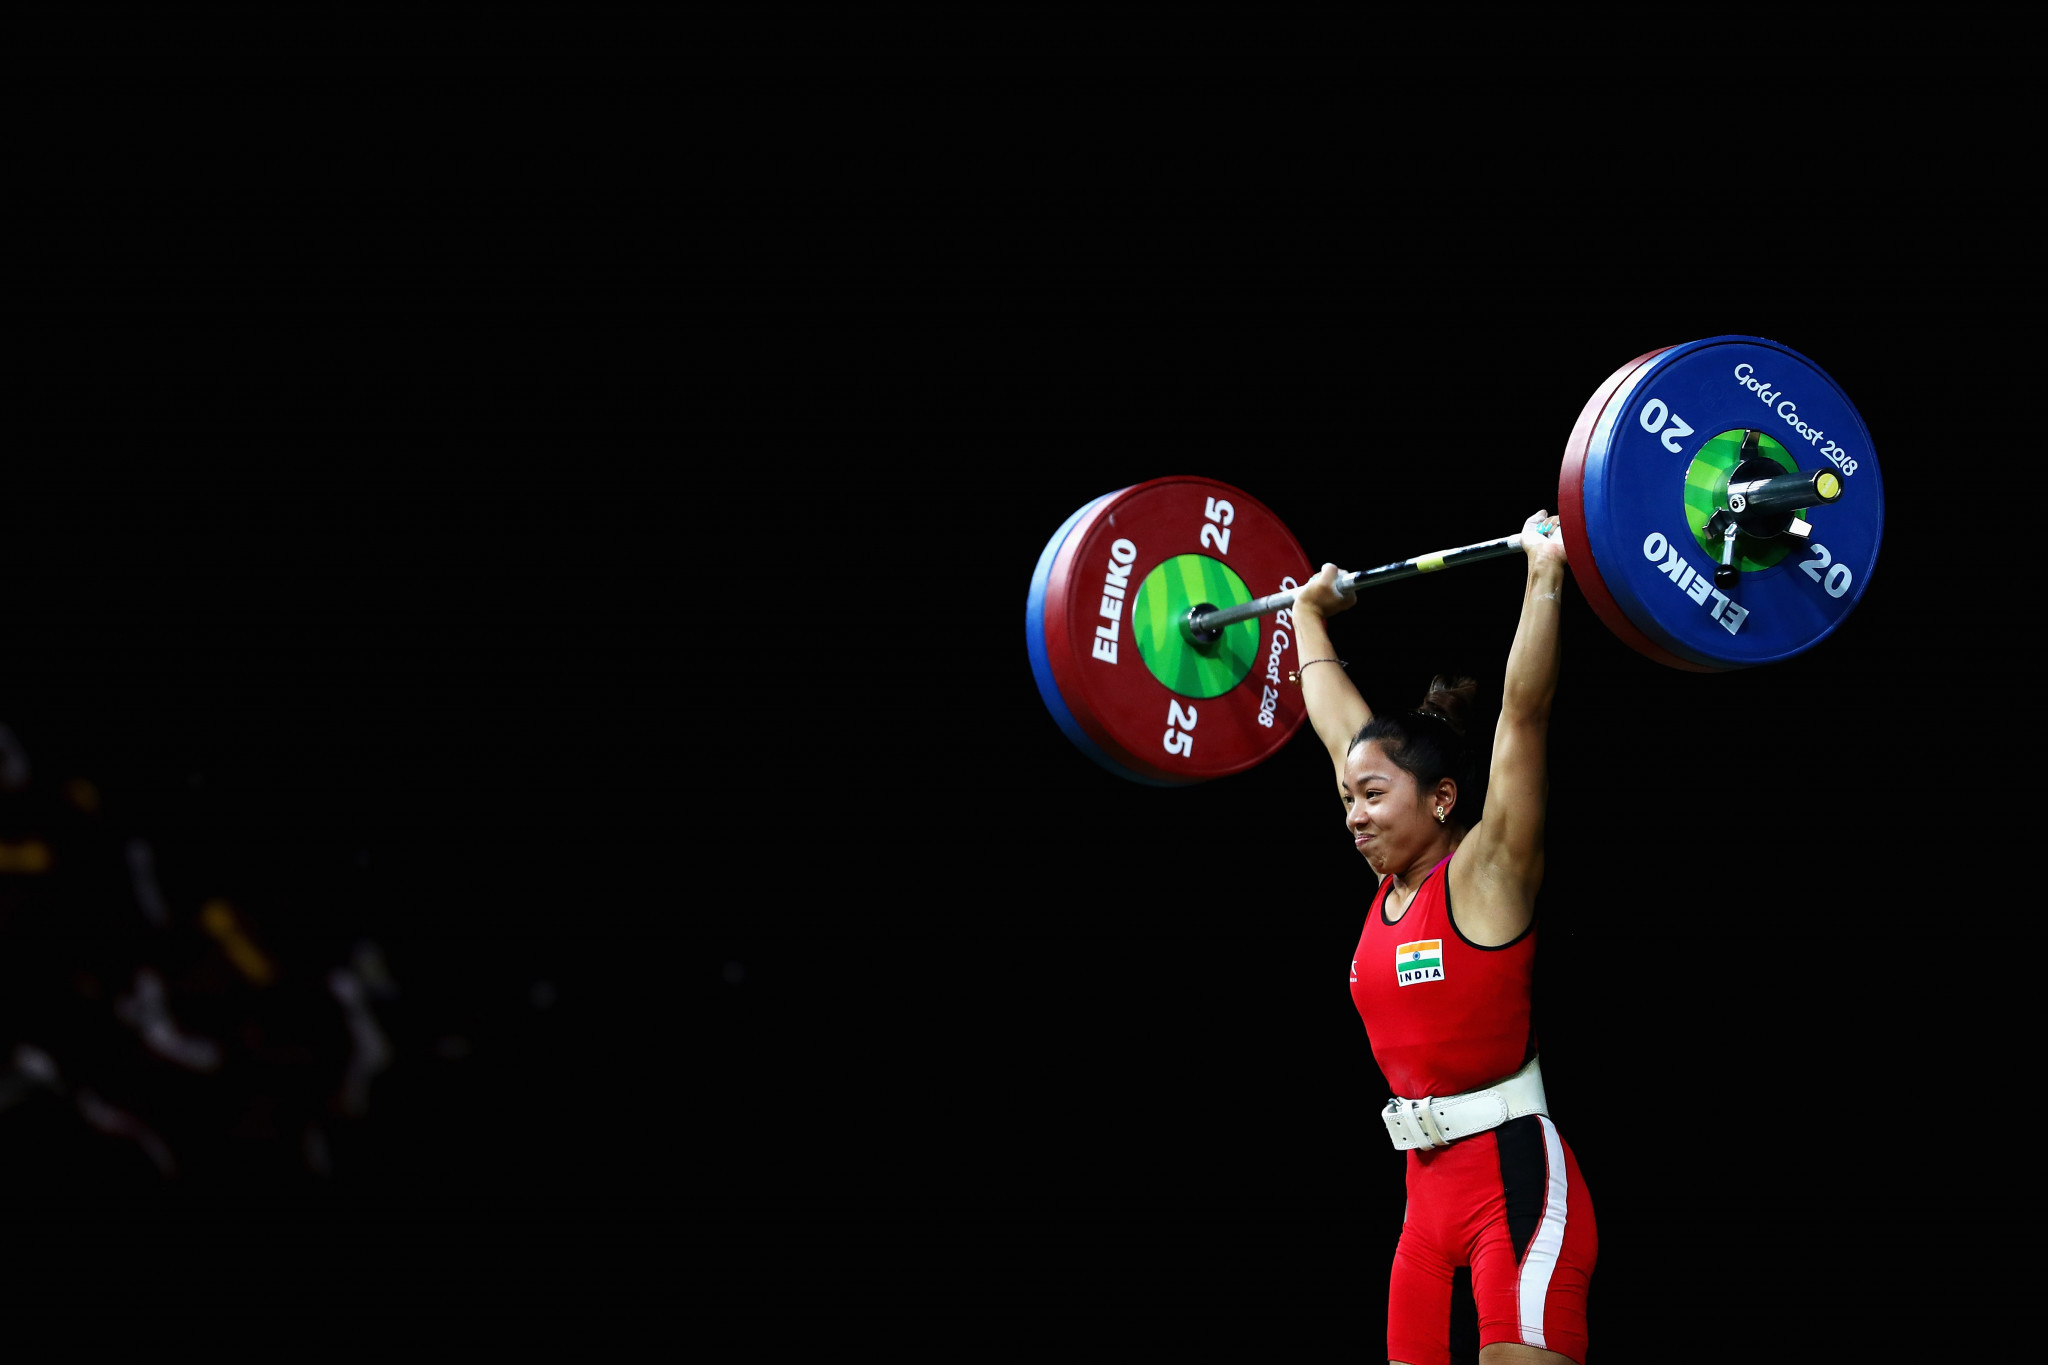 Mirabai Chanu will lead India's medal charge in Ningbo ©Getty Images